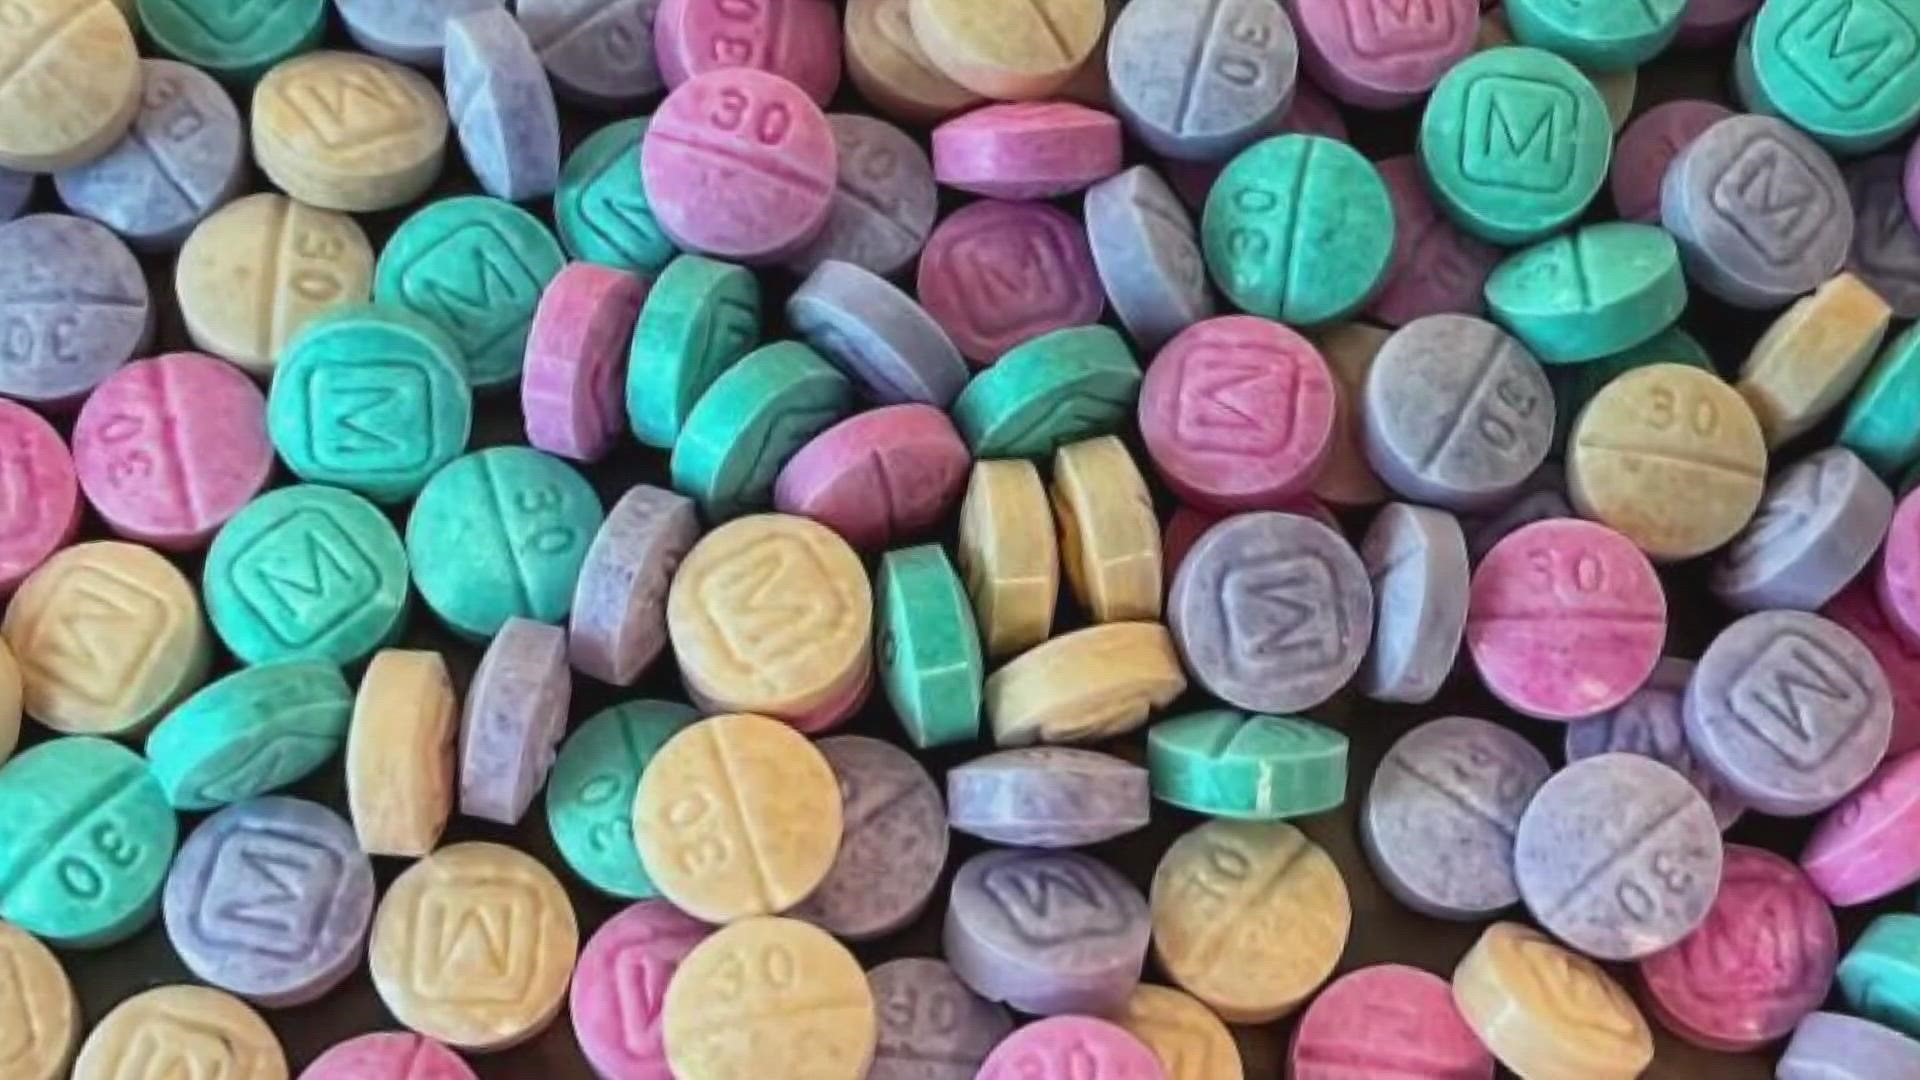 Reports of "rainbow fentanyl" have been popping up across the country since the DEA first issued a warning about the deadly drug in late August.